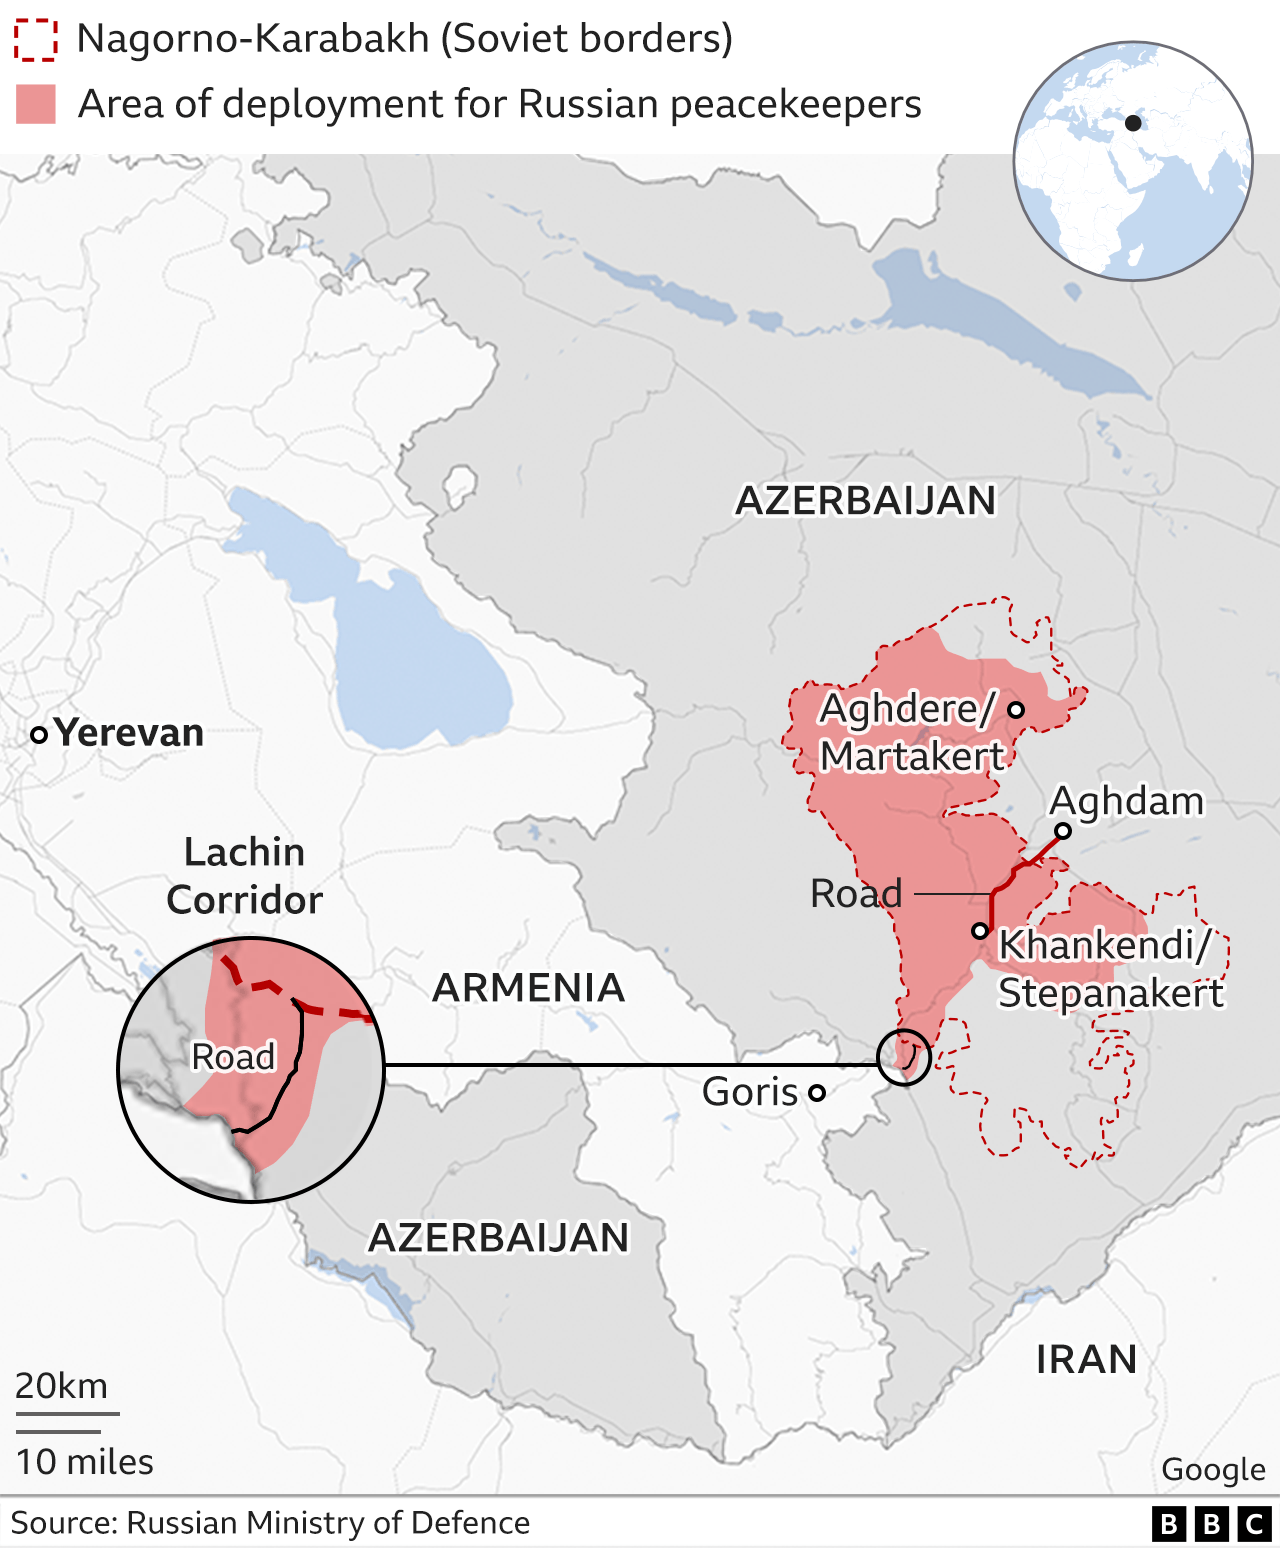 Map of the Nagorno-Karabakh region in Azerbaijan, showing areas of the former autonomous region where Russian peacekeeping forces operate. The map also highlights some of the cities in the area and the Lachin corridor, which, though not a part of the Nagorno-Karabakh region, is to remain under the control of Russian peacekeepers to act as a connection with Armenia for ethnic-Armenian population in the region.